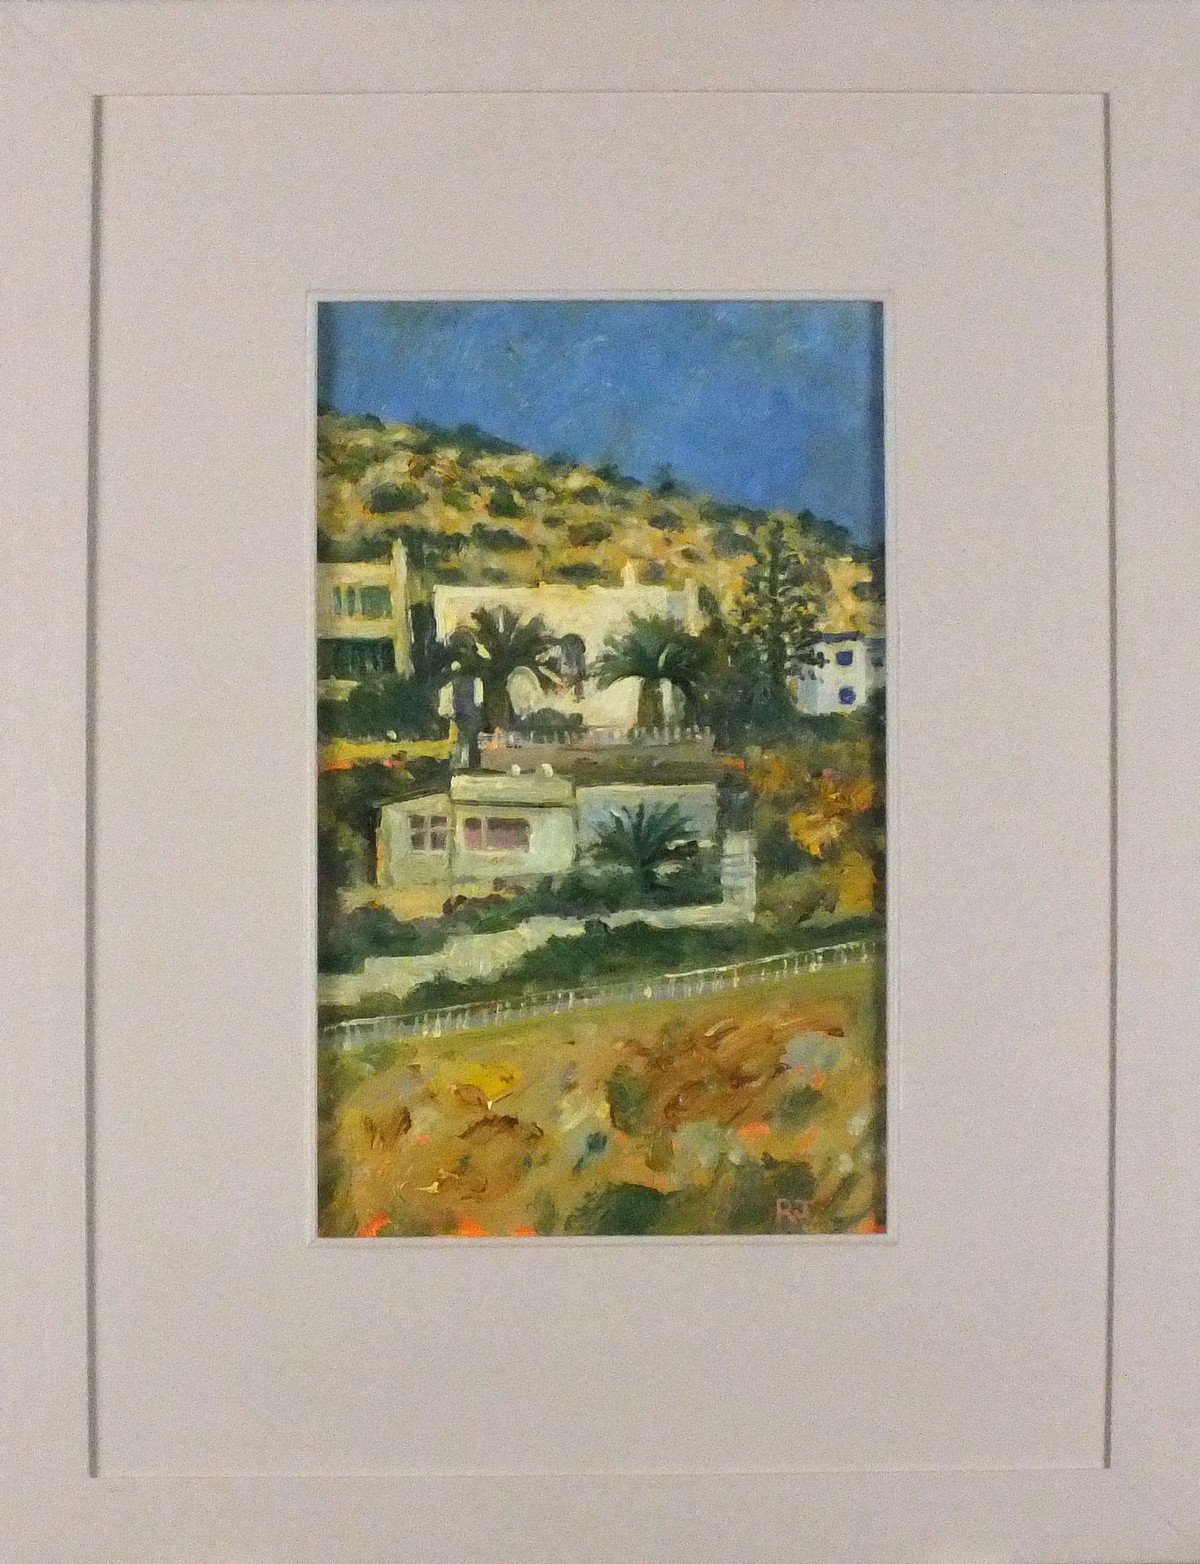 Robert JONES (British b. 1943) In the Aegean, Houses and Palms, Agathonision, Oil on canvas board, - Image 2 of 2